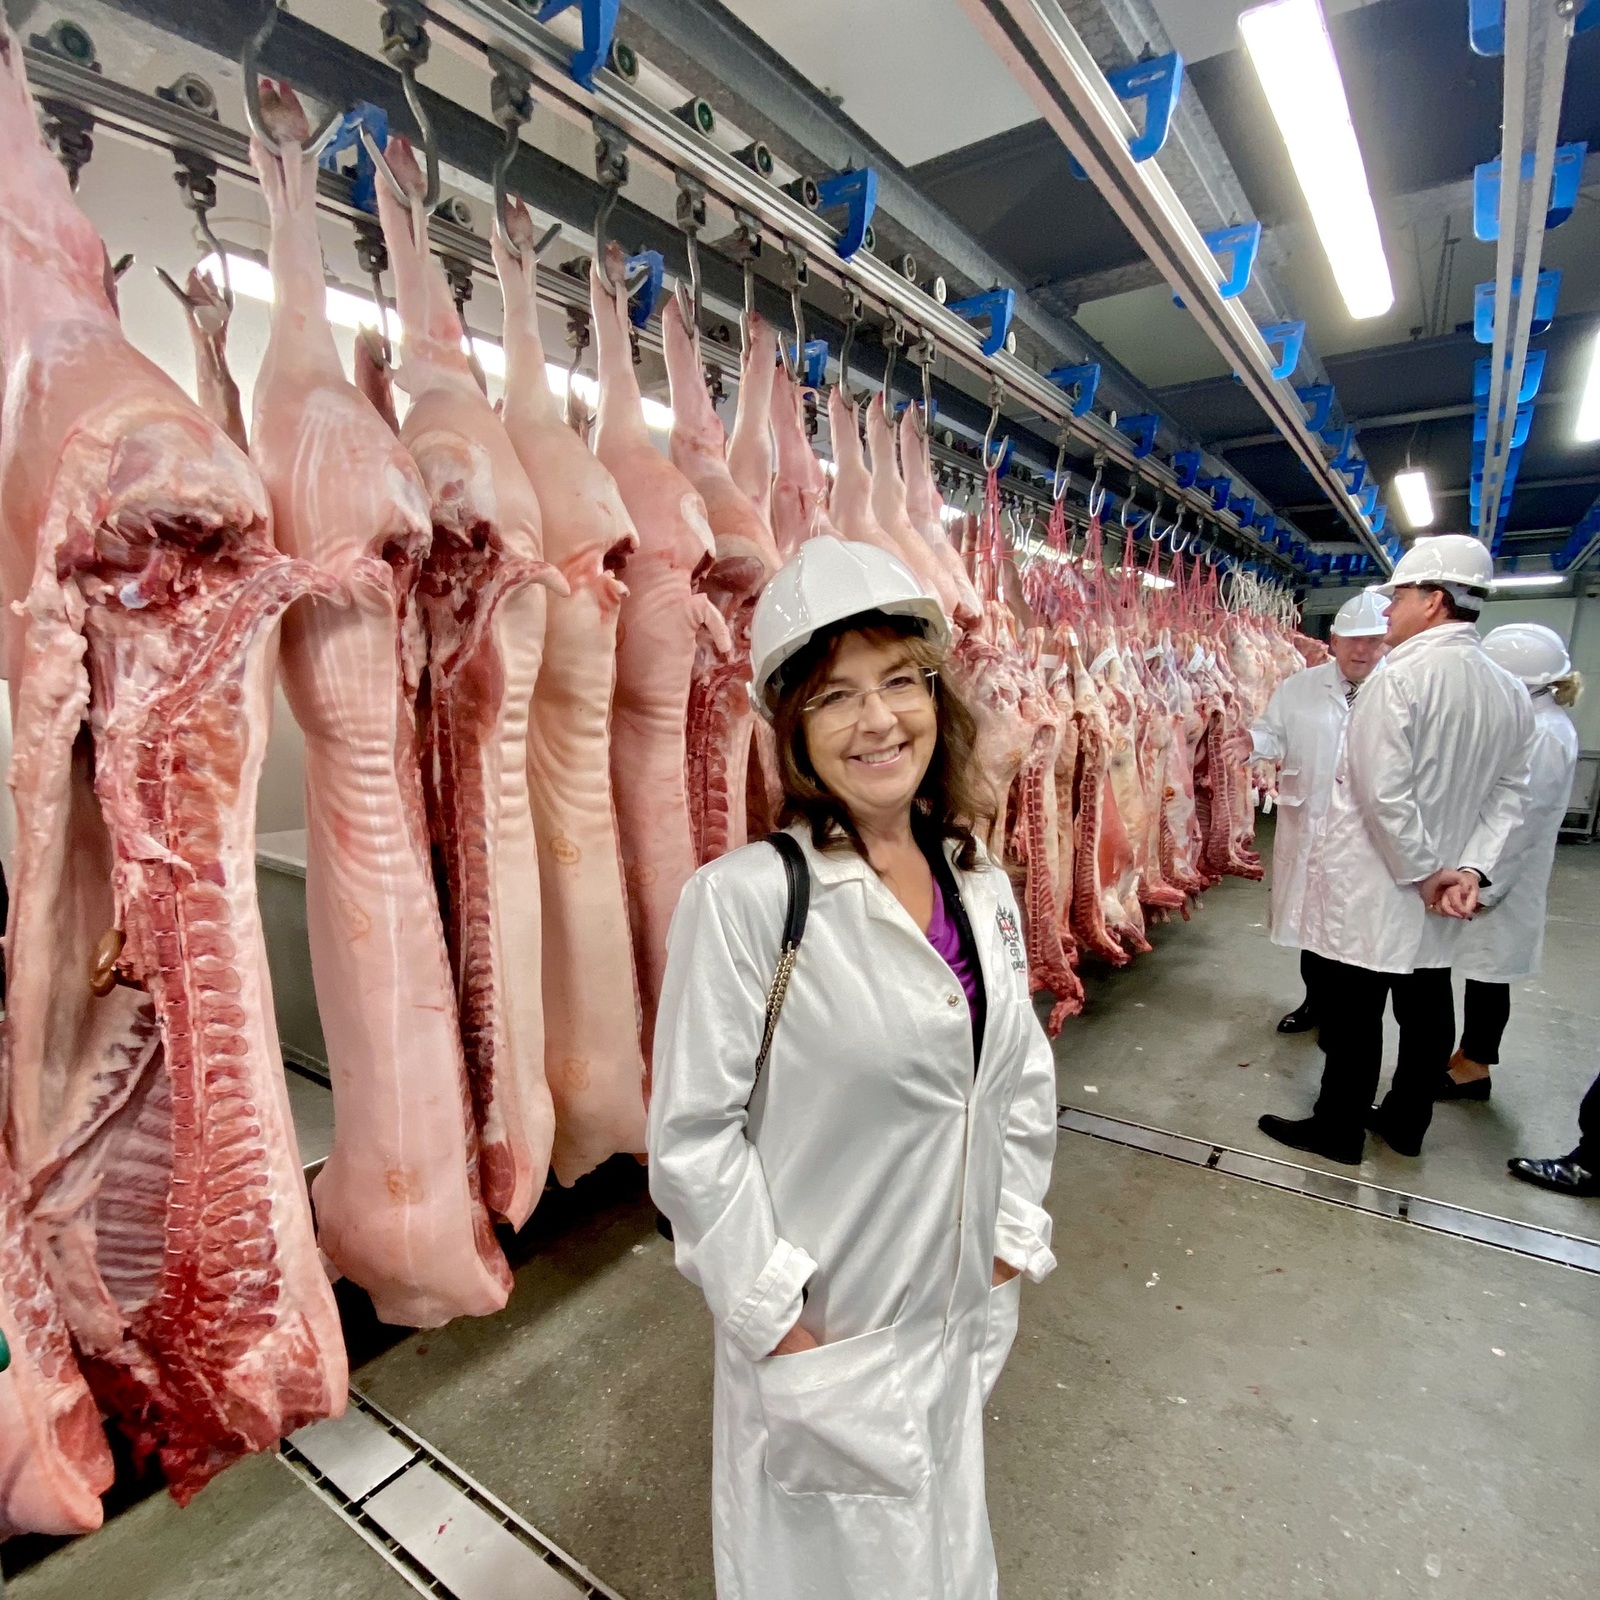 20 Oct 22  – A fascinating 6am visit to Smithfield Market